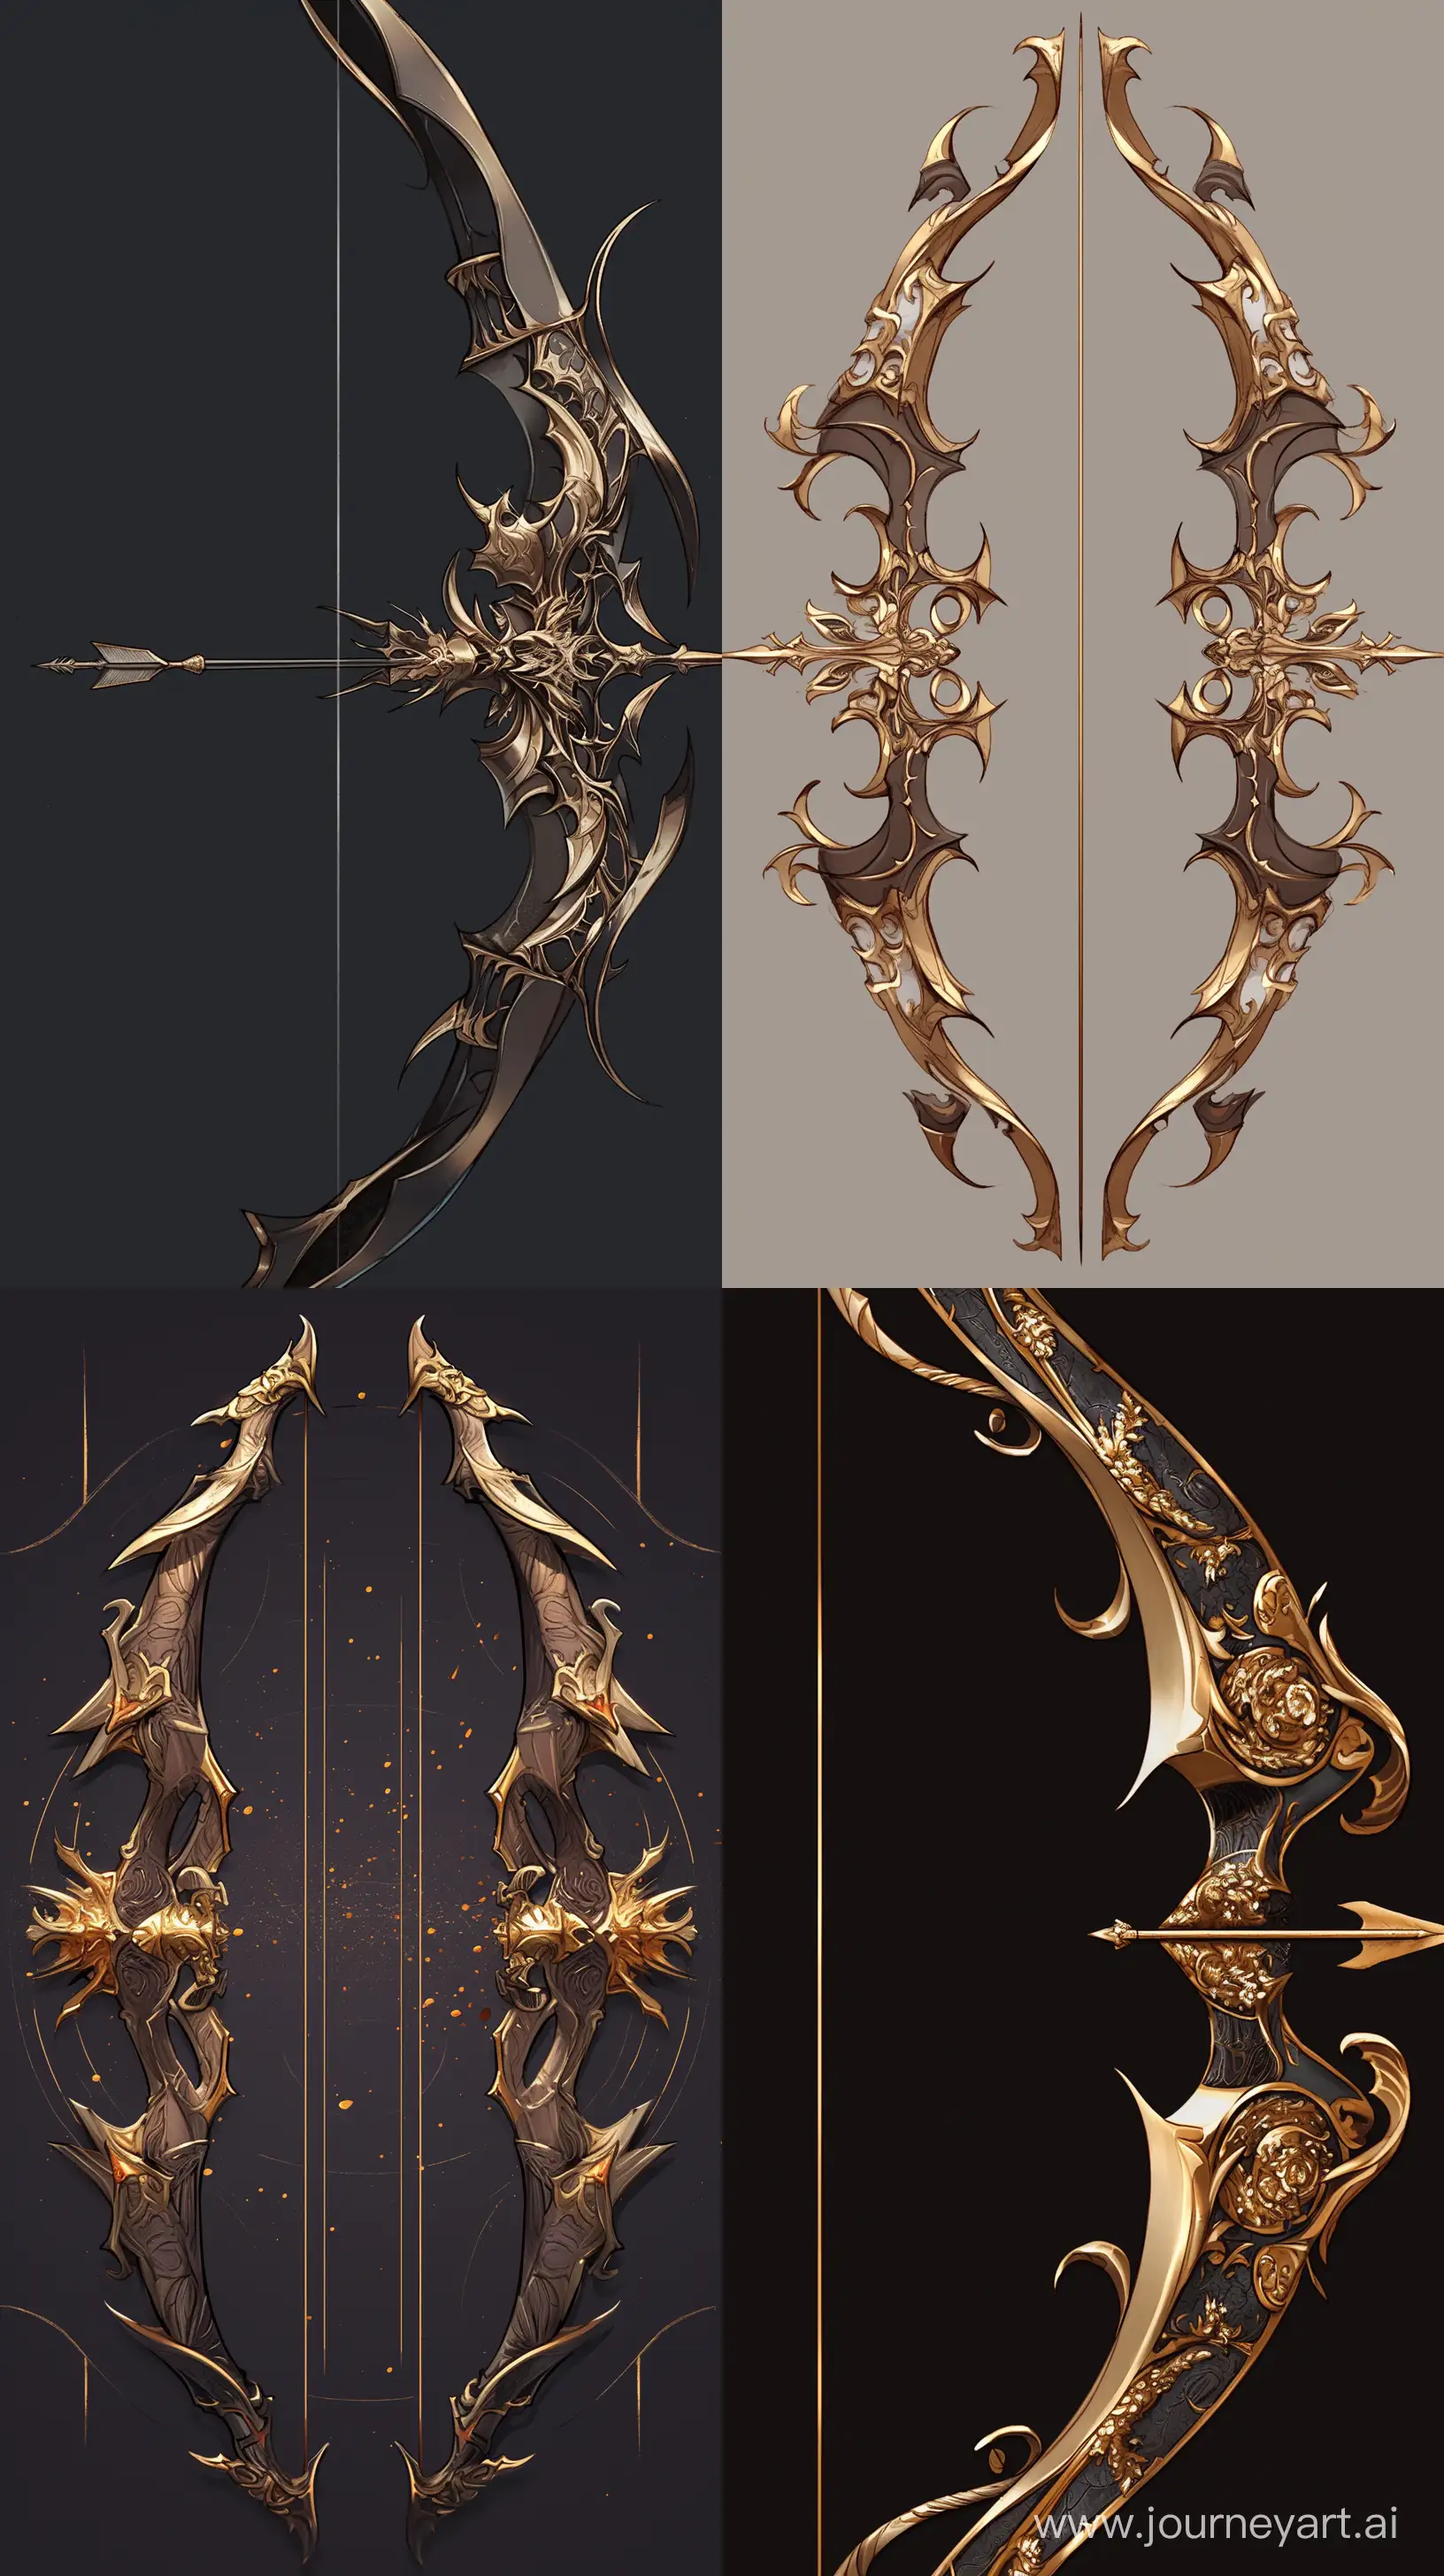 Gilded-Bow-Weapon-Sheet-Intricately-Crafted-Golden-Archery-Arsenal